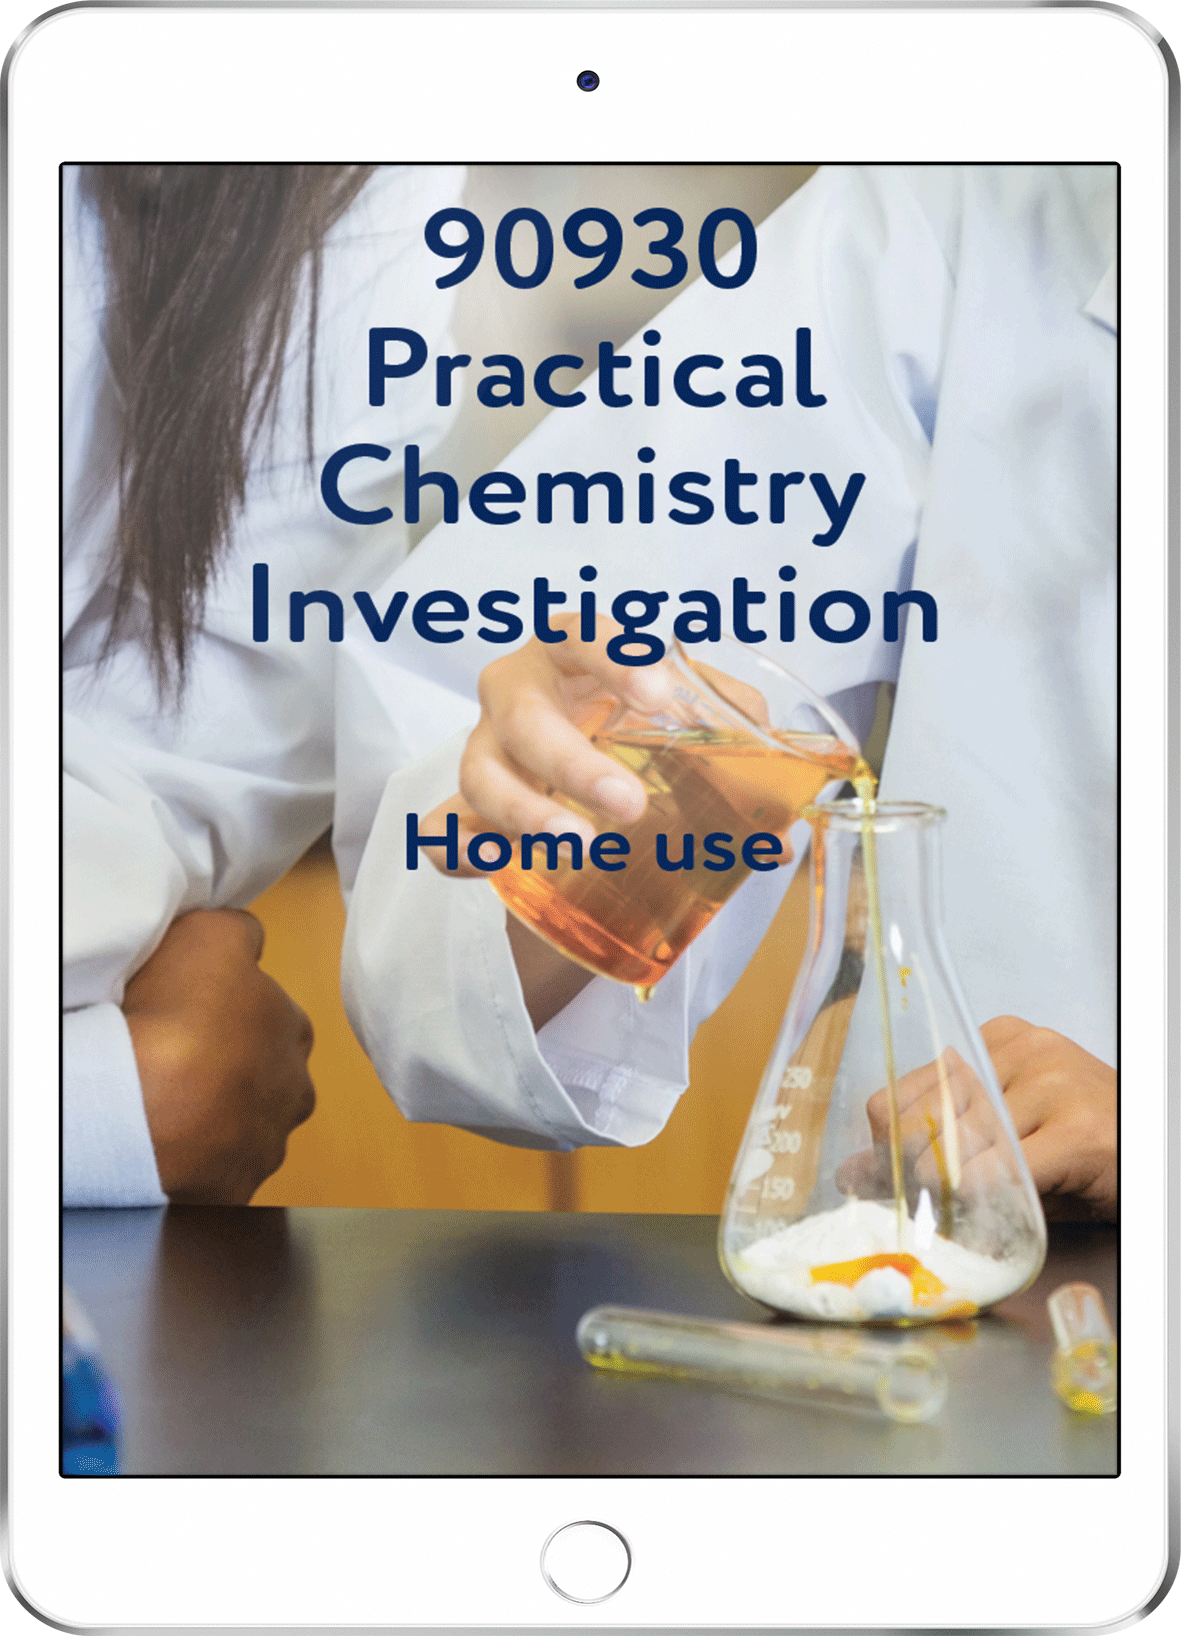 90930 Practical Chemistry Investigation - Home Use